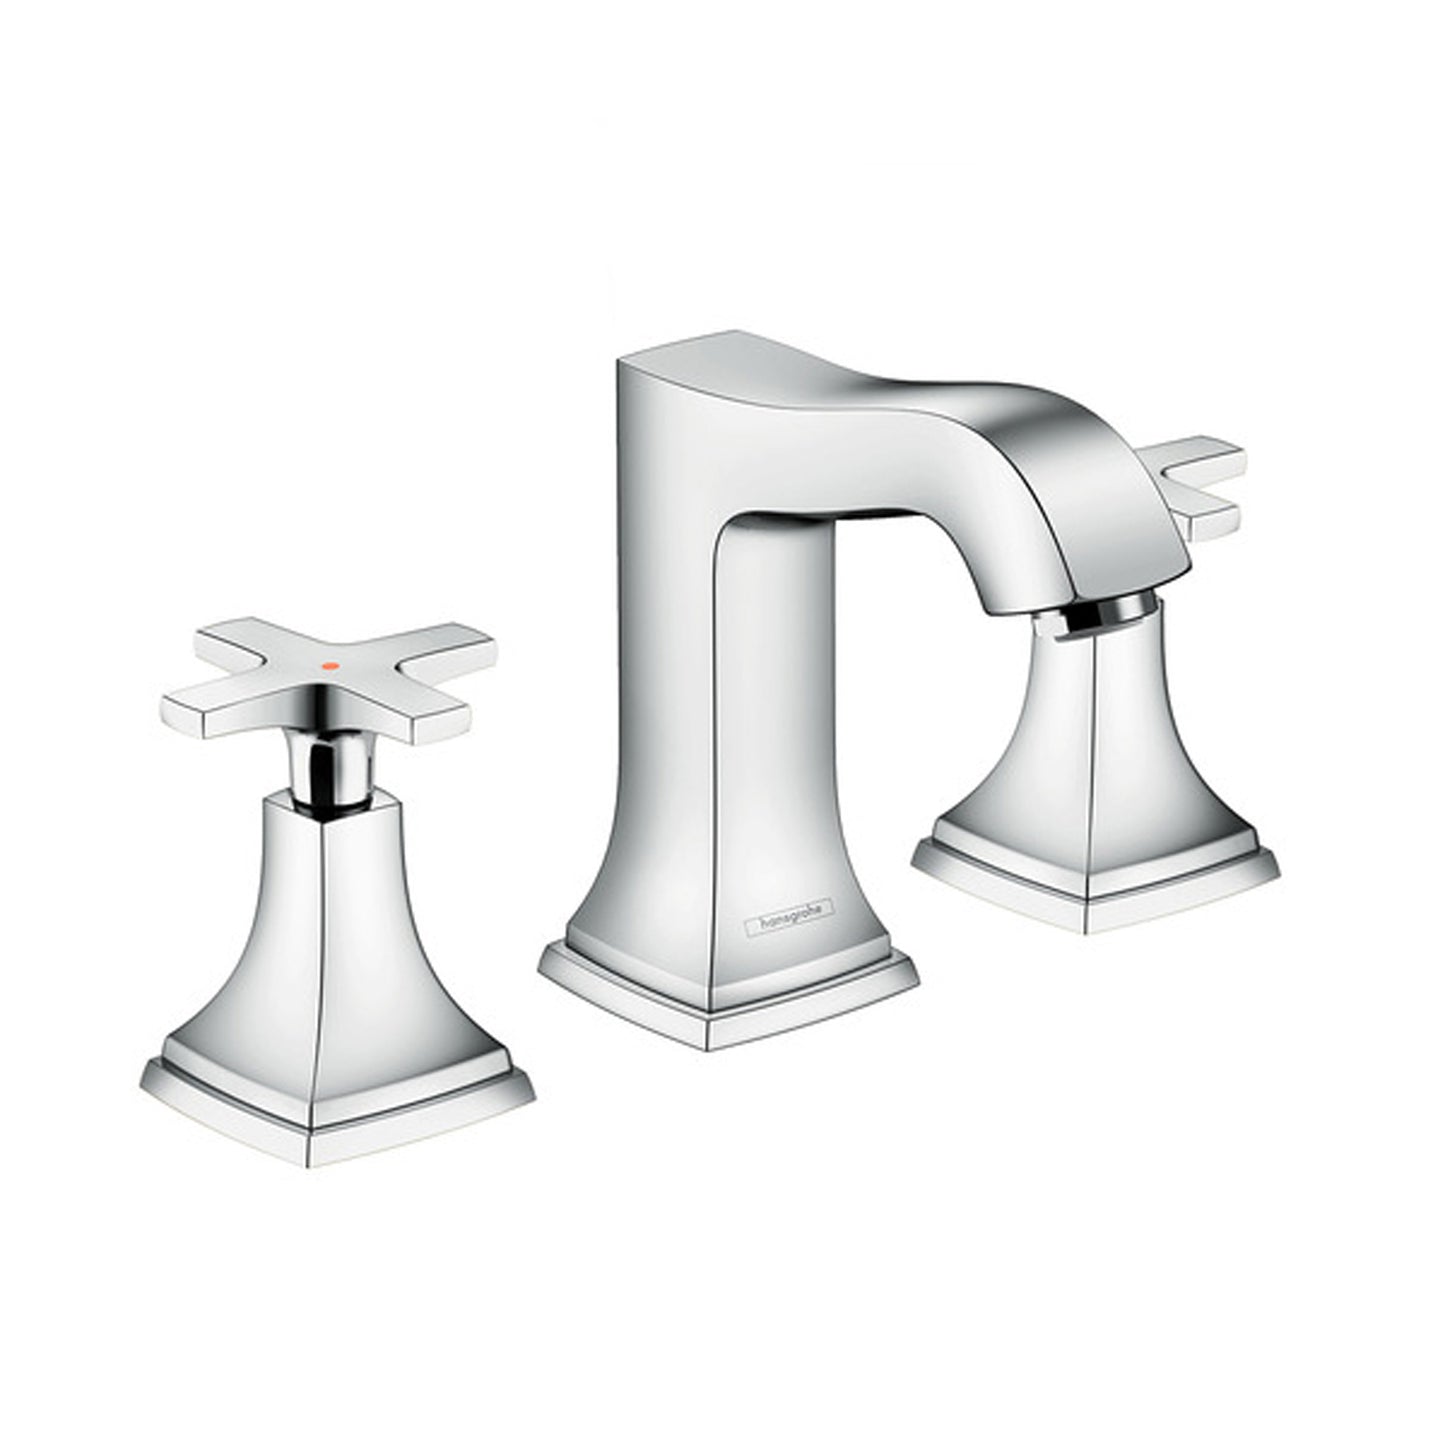 Hansgrohe Metropol Classic 3Hole Basin mixer 110 cross handle with pull rod waste set 31306.000